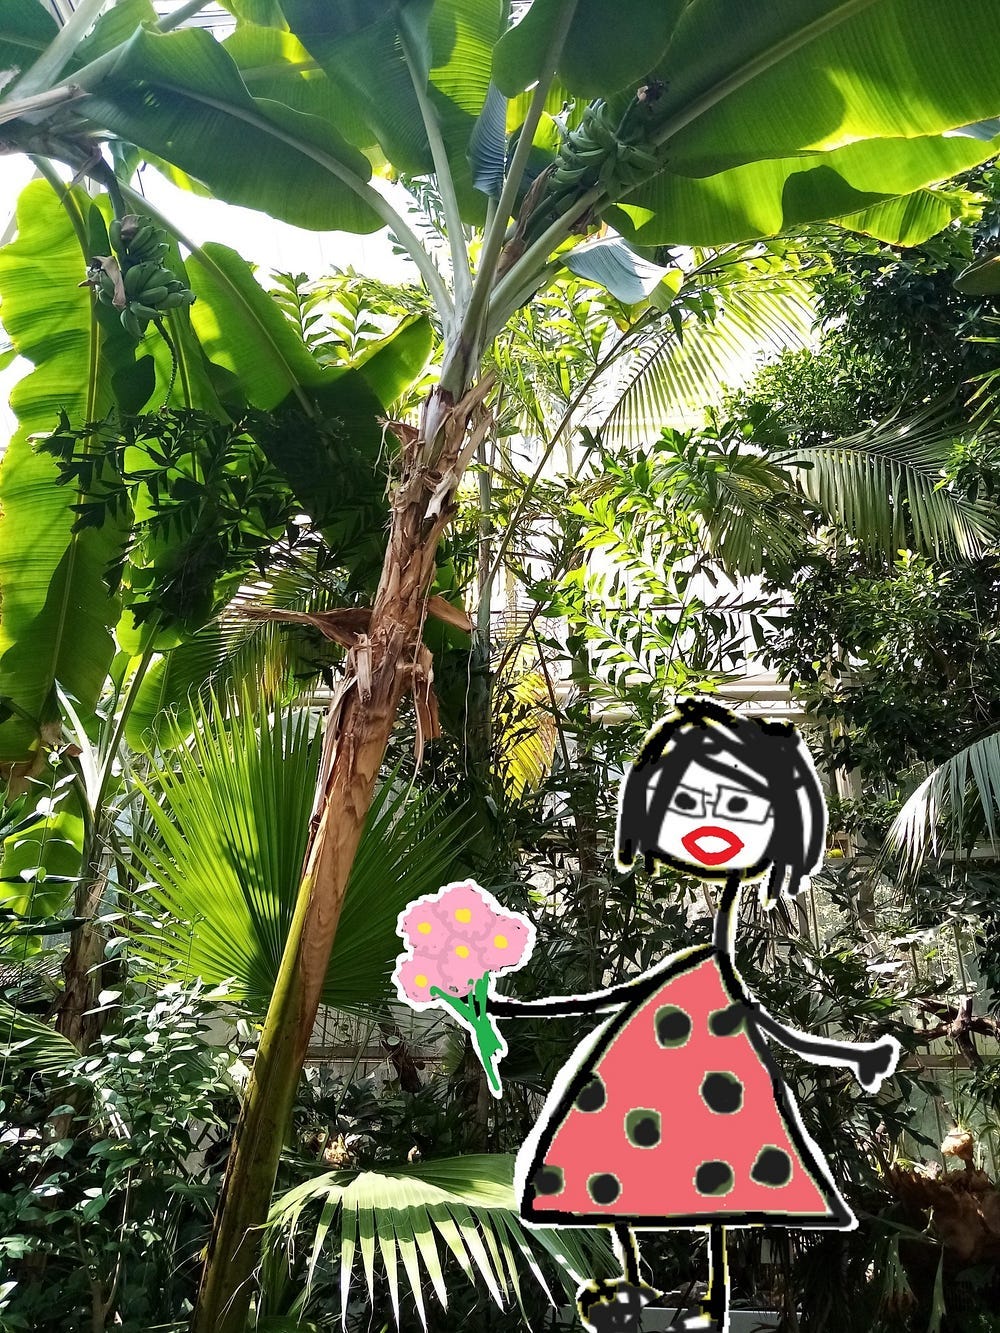 Who would have known the Botanical Gardens couldl be so refreshing?